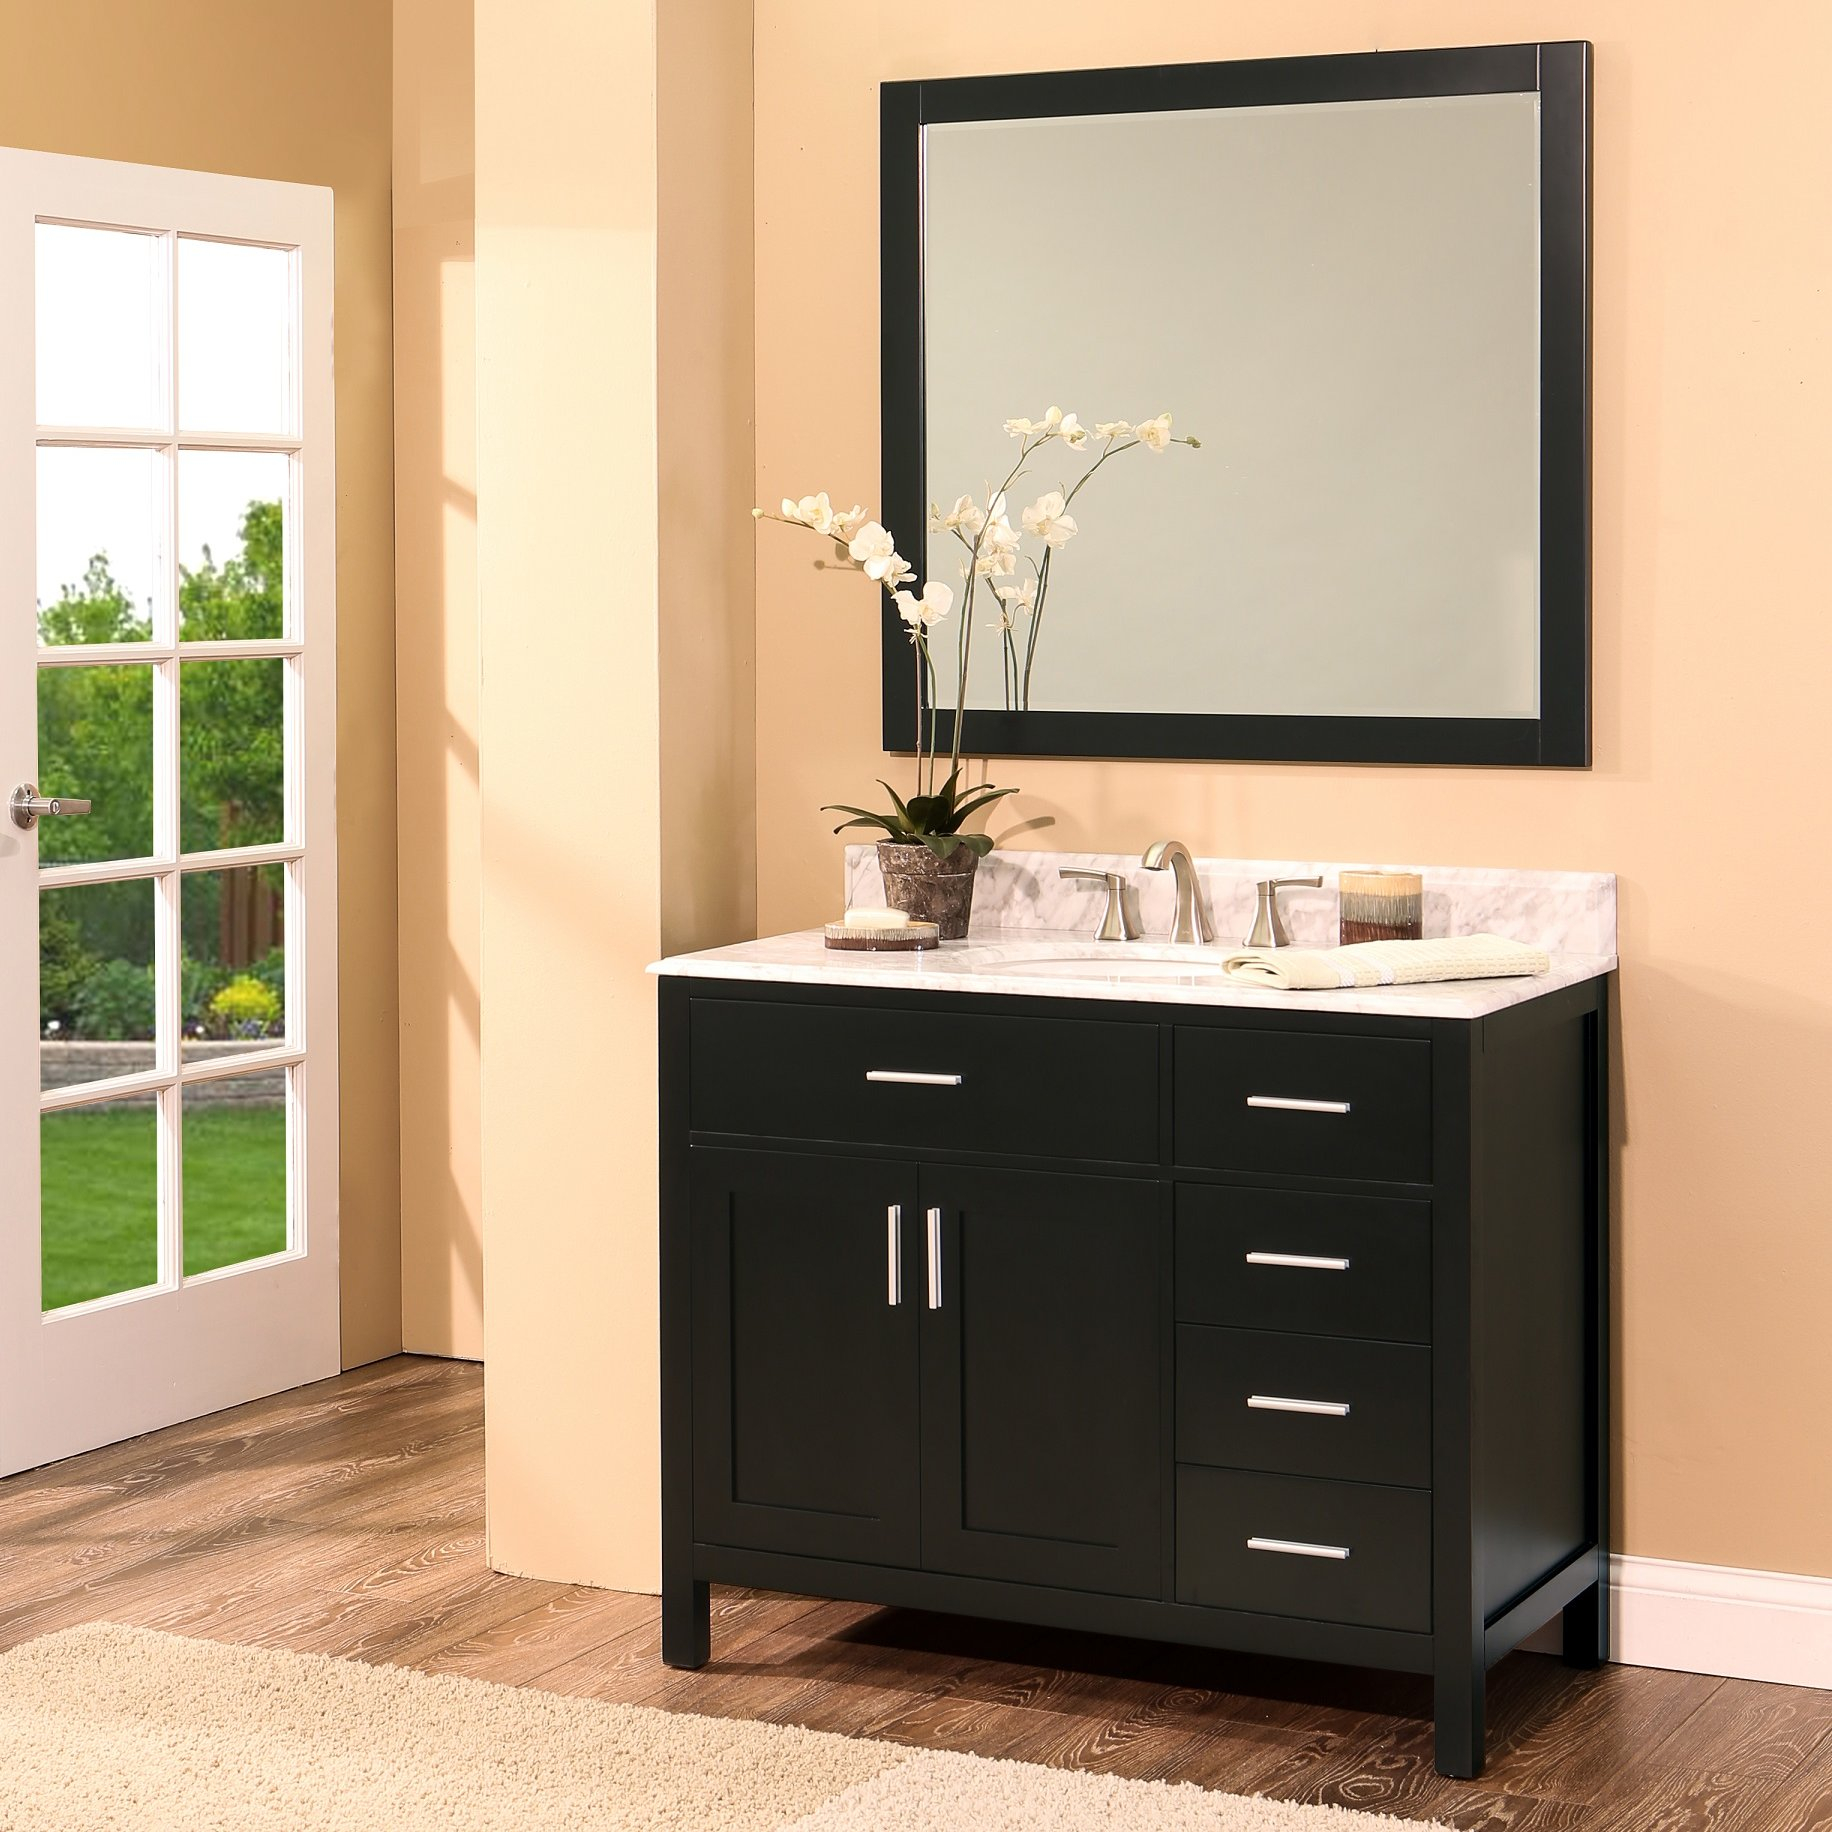 Ngy Stone Cabinet Arezzo 36 Single Bathroom Vanity With Mirror with regard to measurements 1832 X 1832